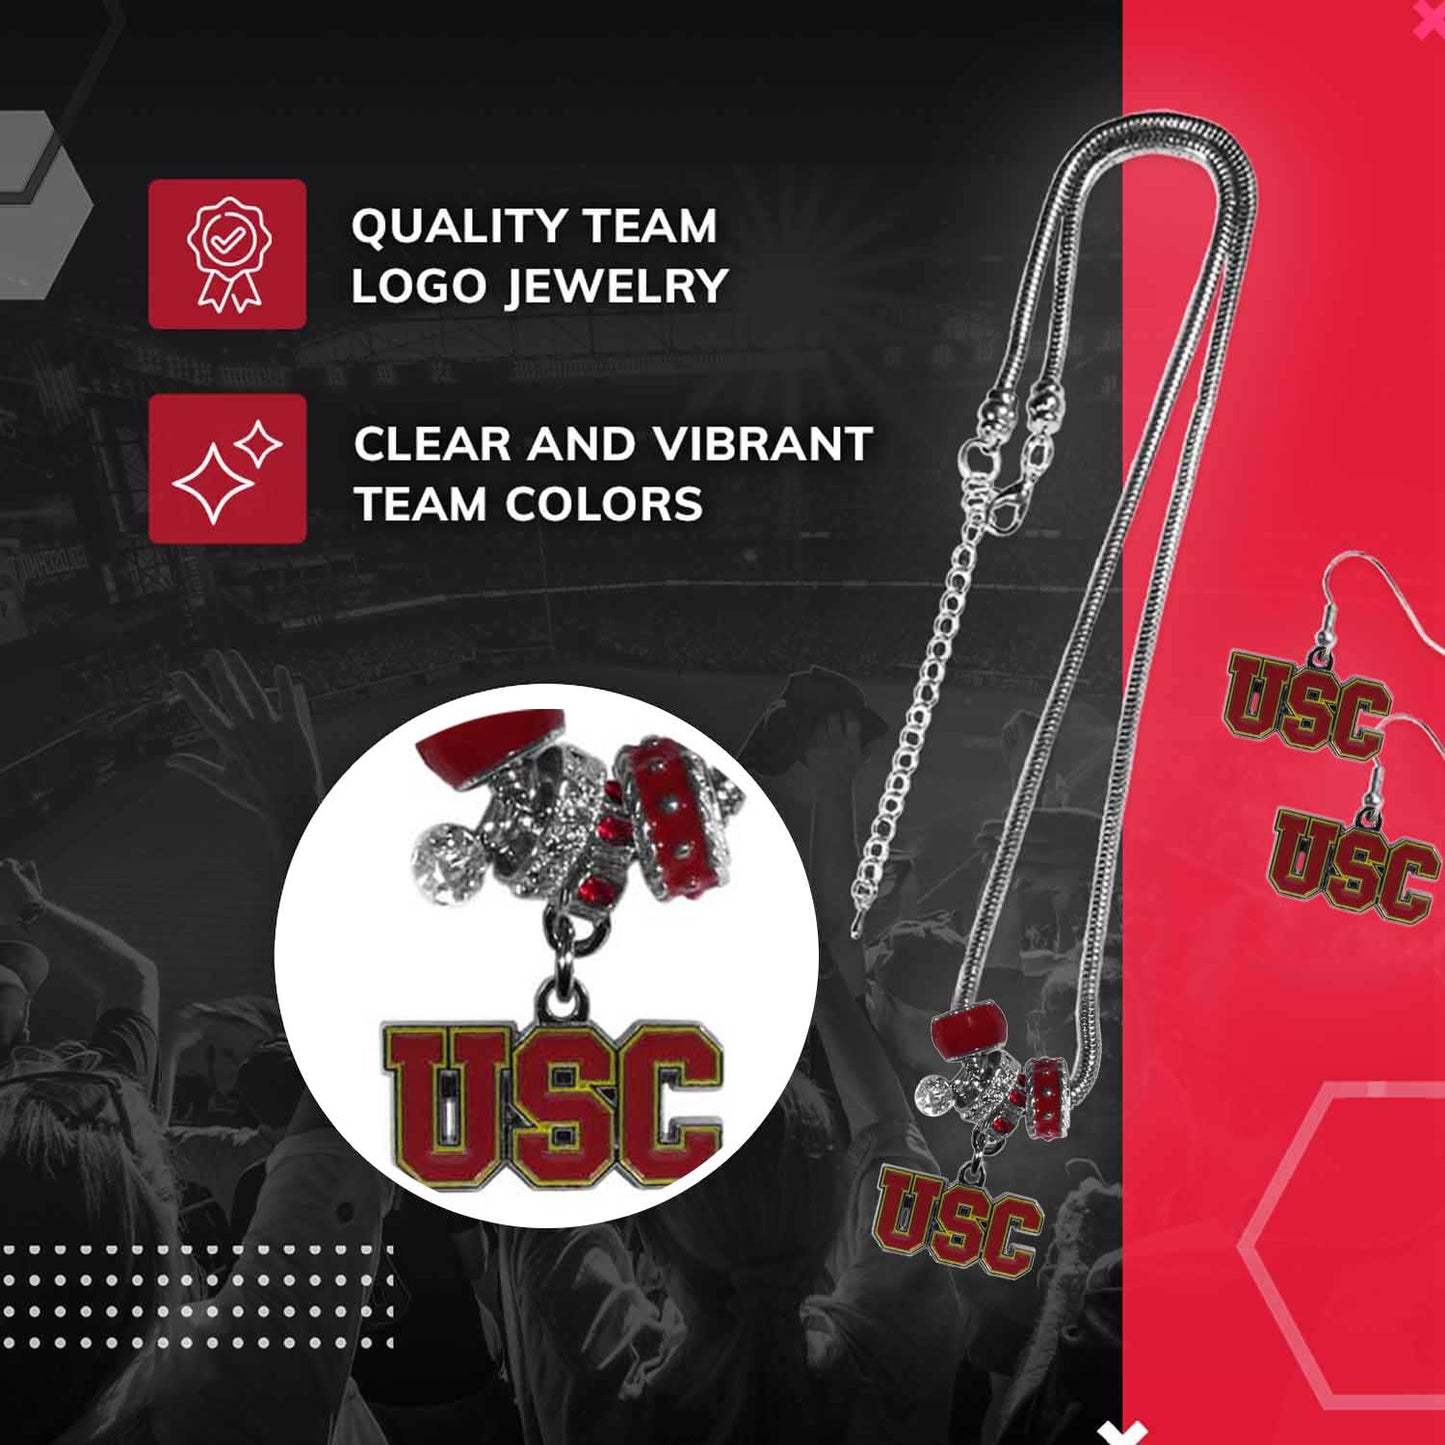 USC Trojans Collegiate Game Day Necklace and Earrings - Silver